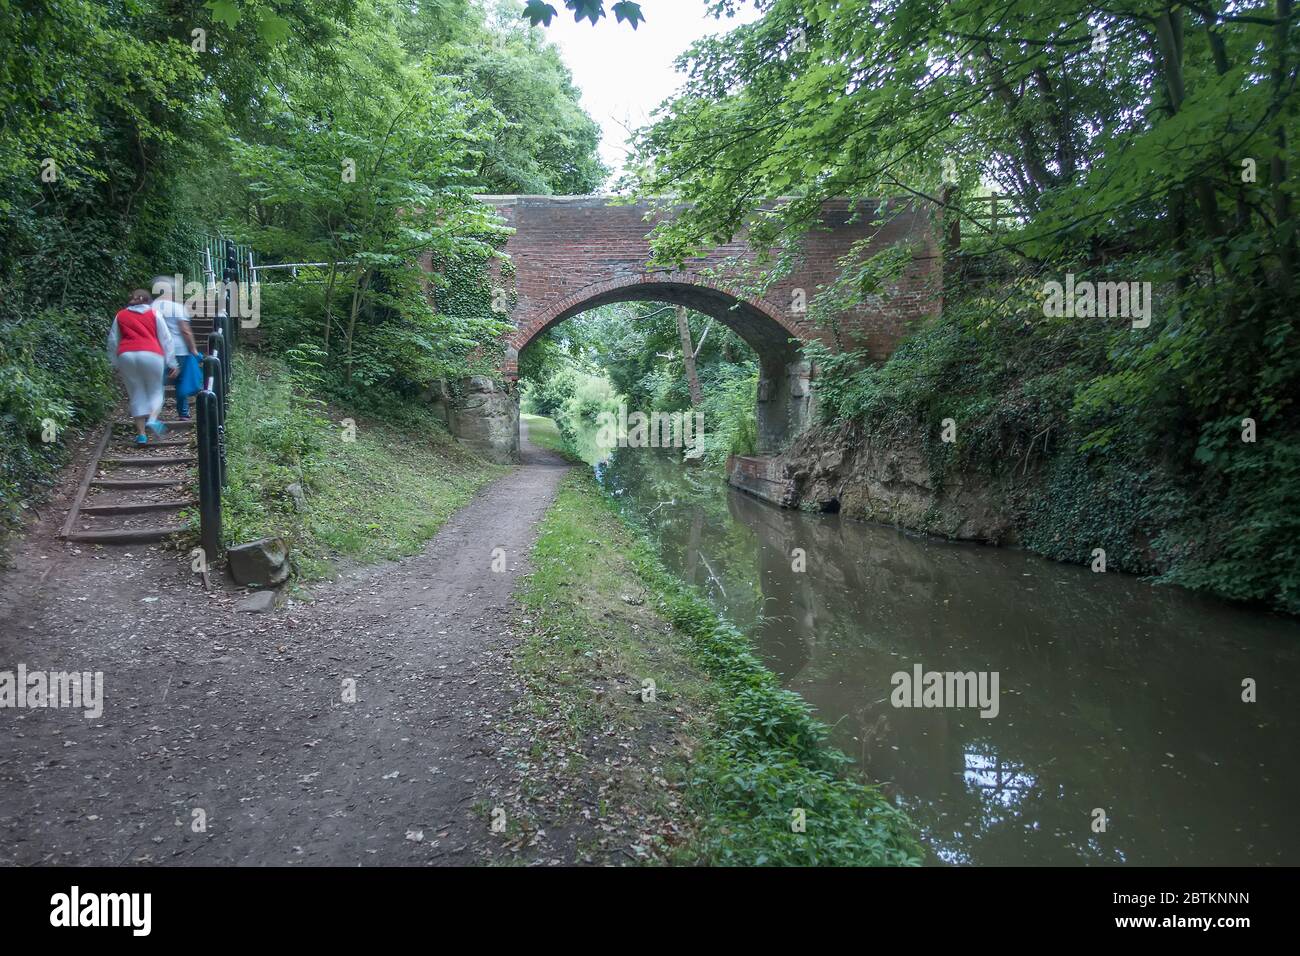 People use bridge over Trent and Mersey Canal near Armitage, Staffordshire, UK Stock Photo